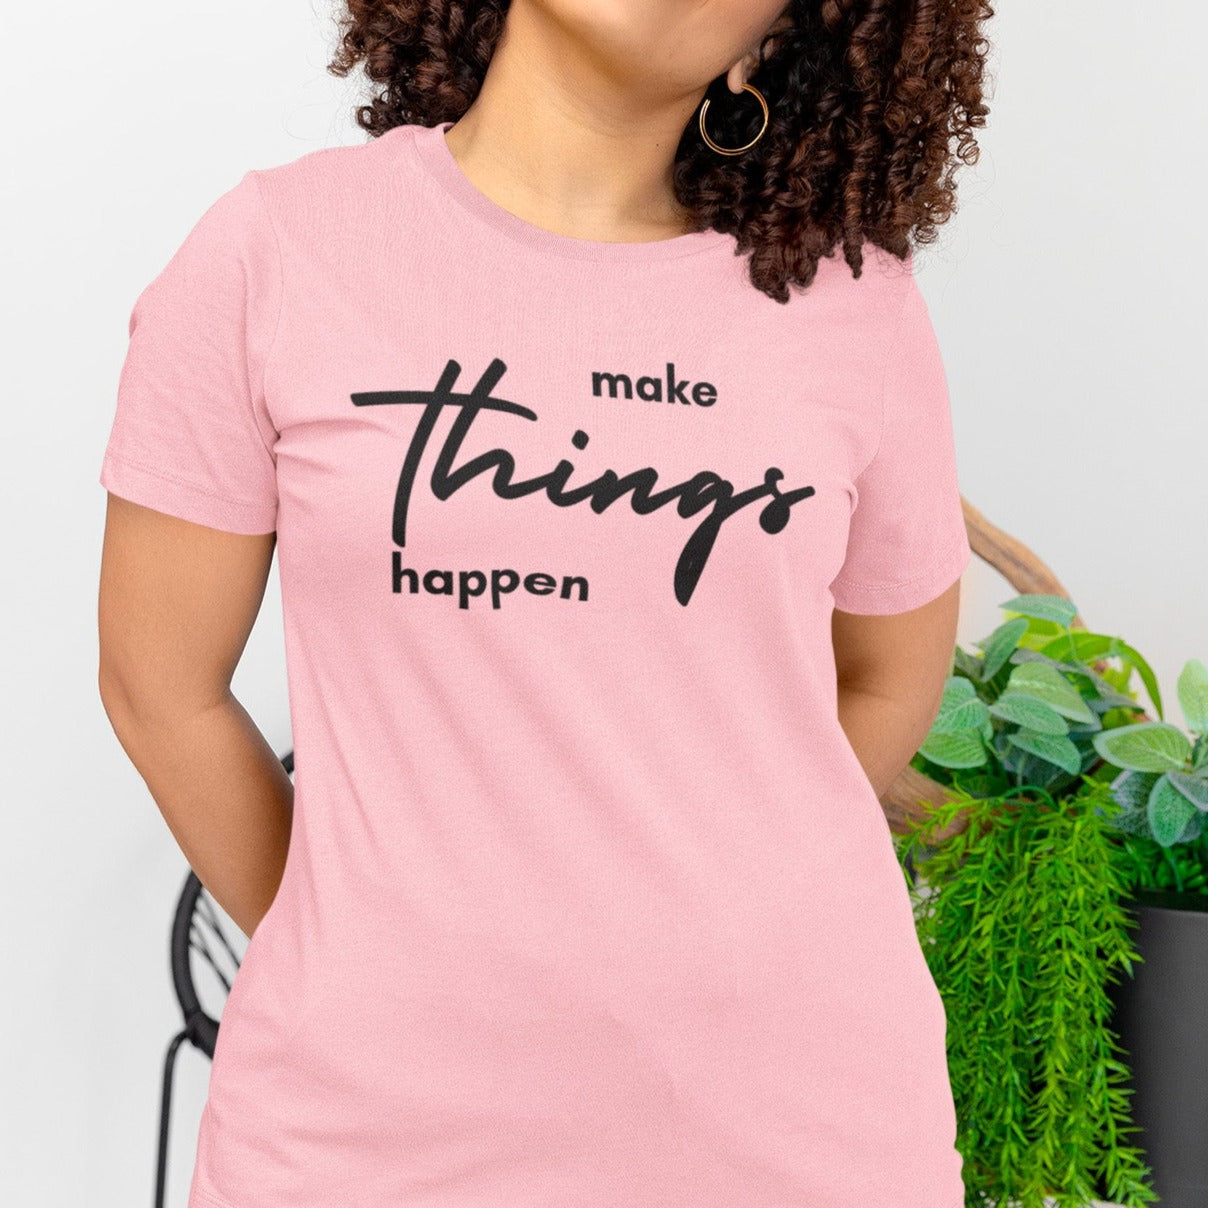 make-things-happen-pink-t-shirt-women-inspiring-mockup-of-a-curly-haired-woman-wearing-a-bella-canvas-crewneck-t-shirt